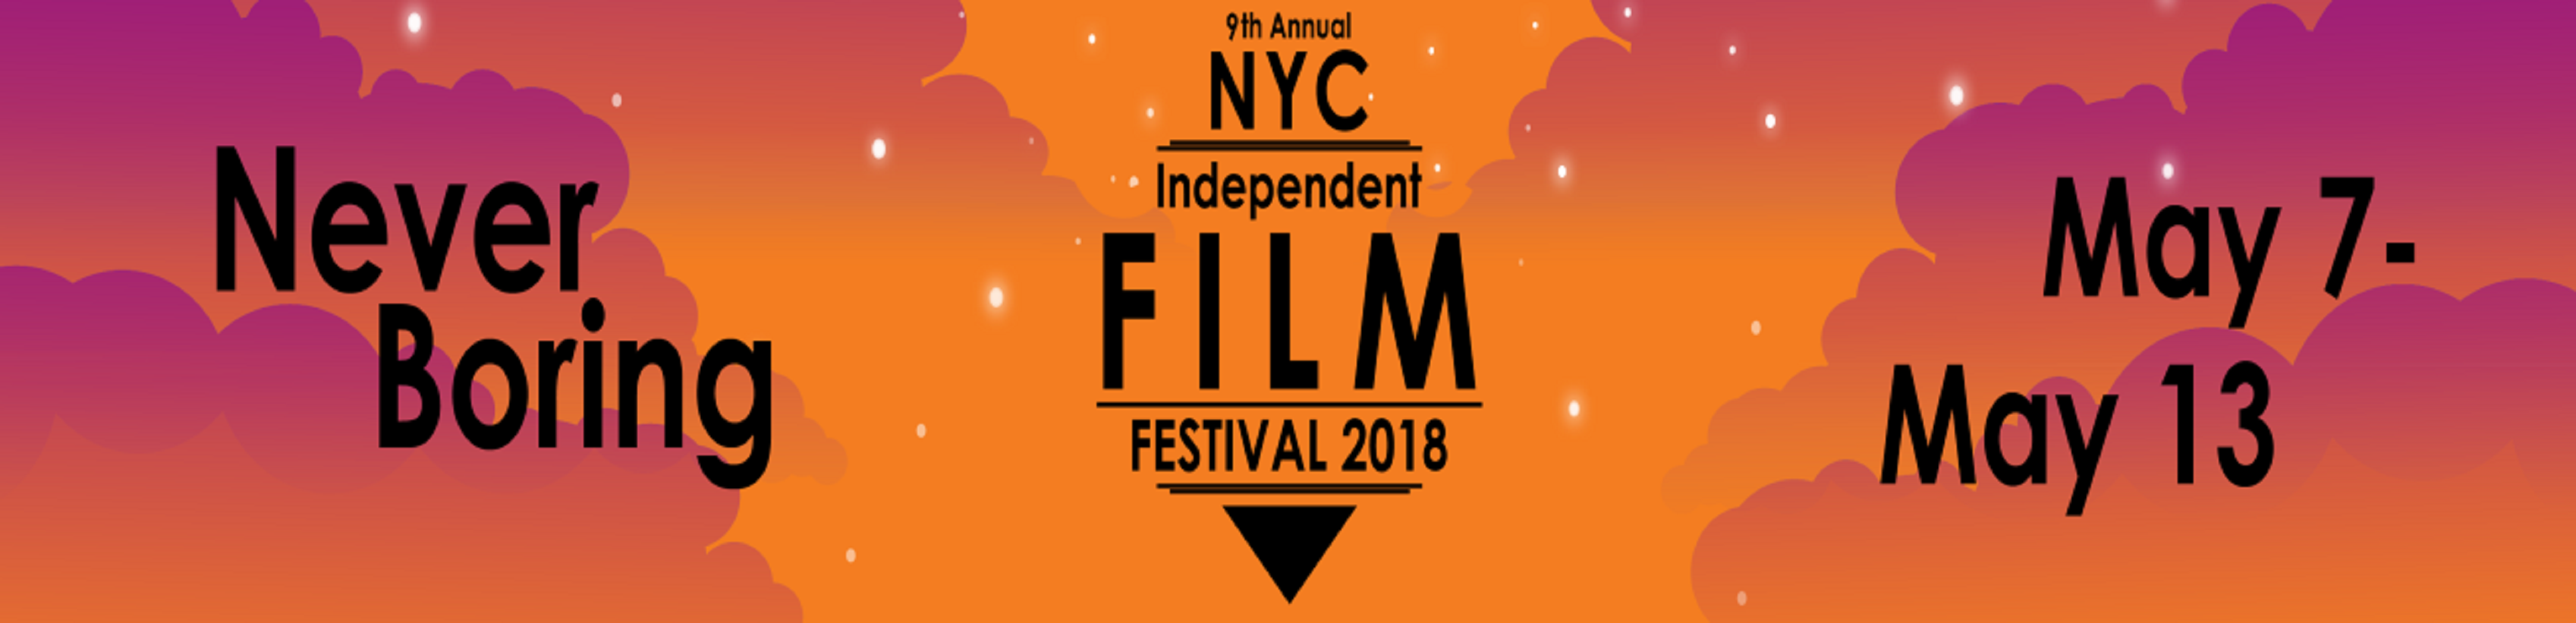 NYC Indie Film Festival 2018 | Review